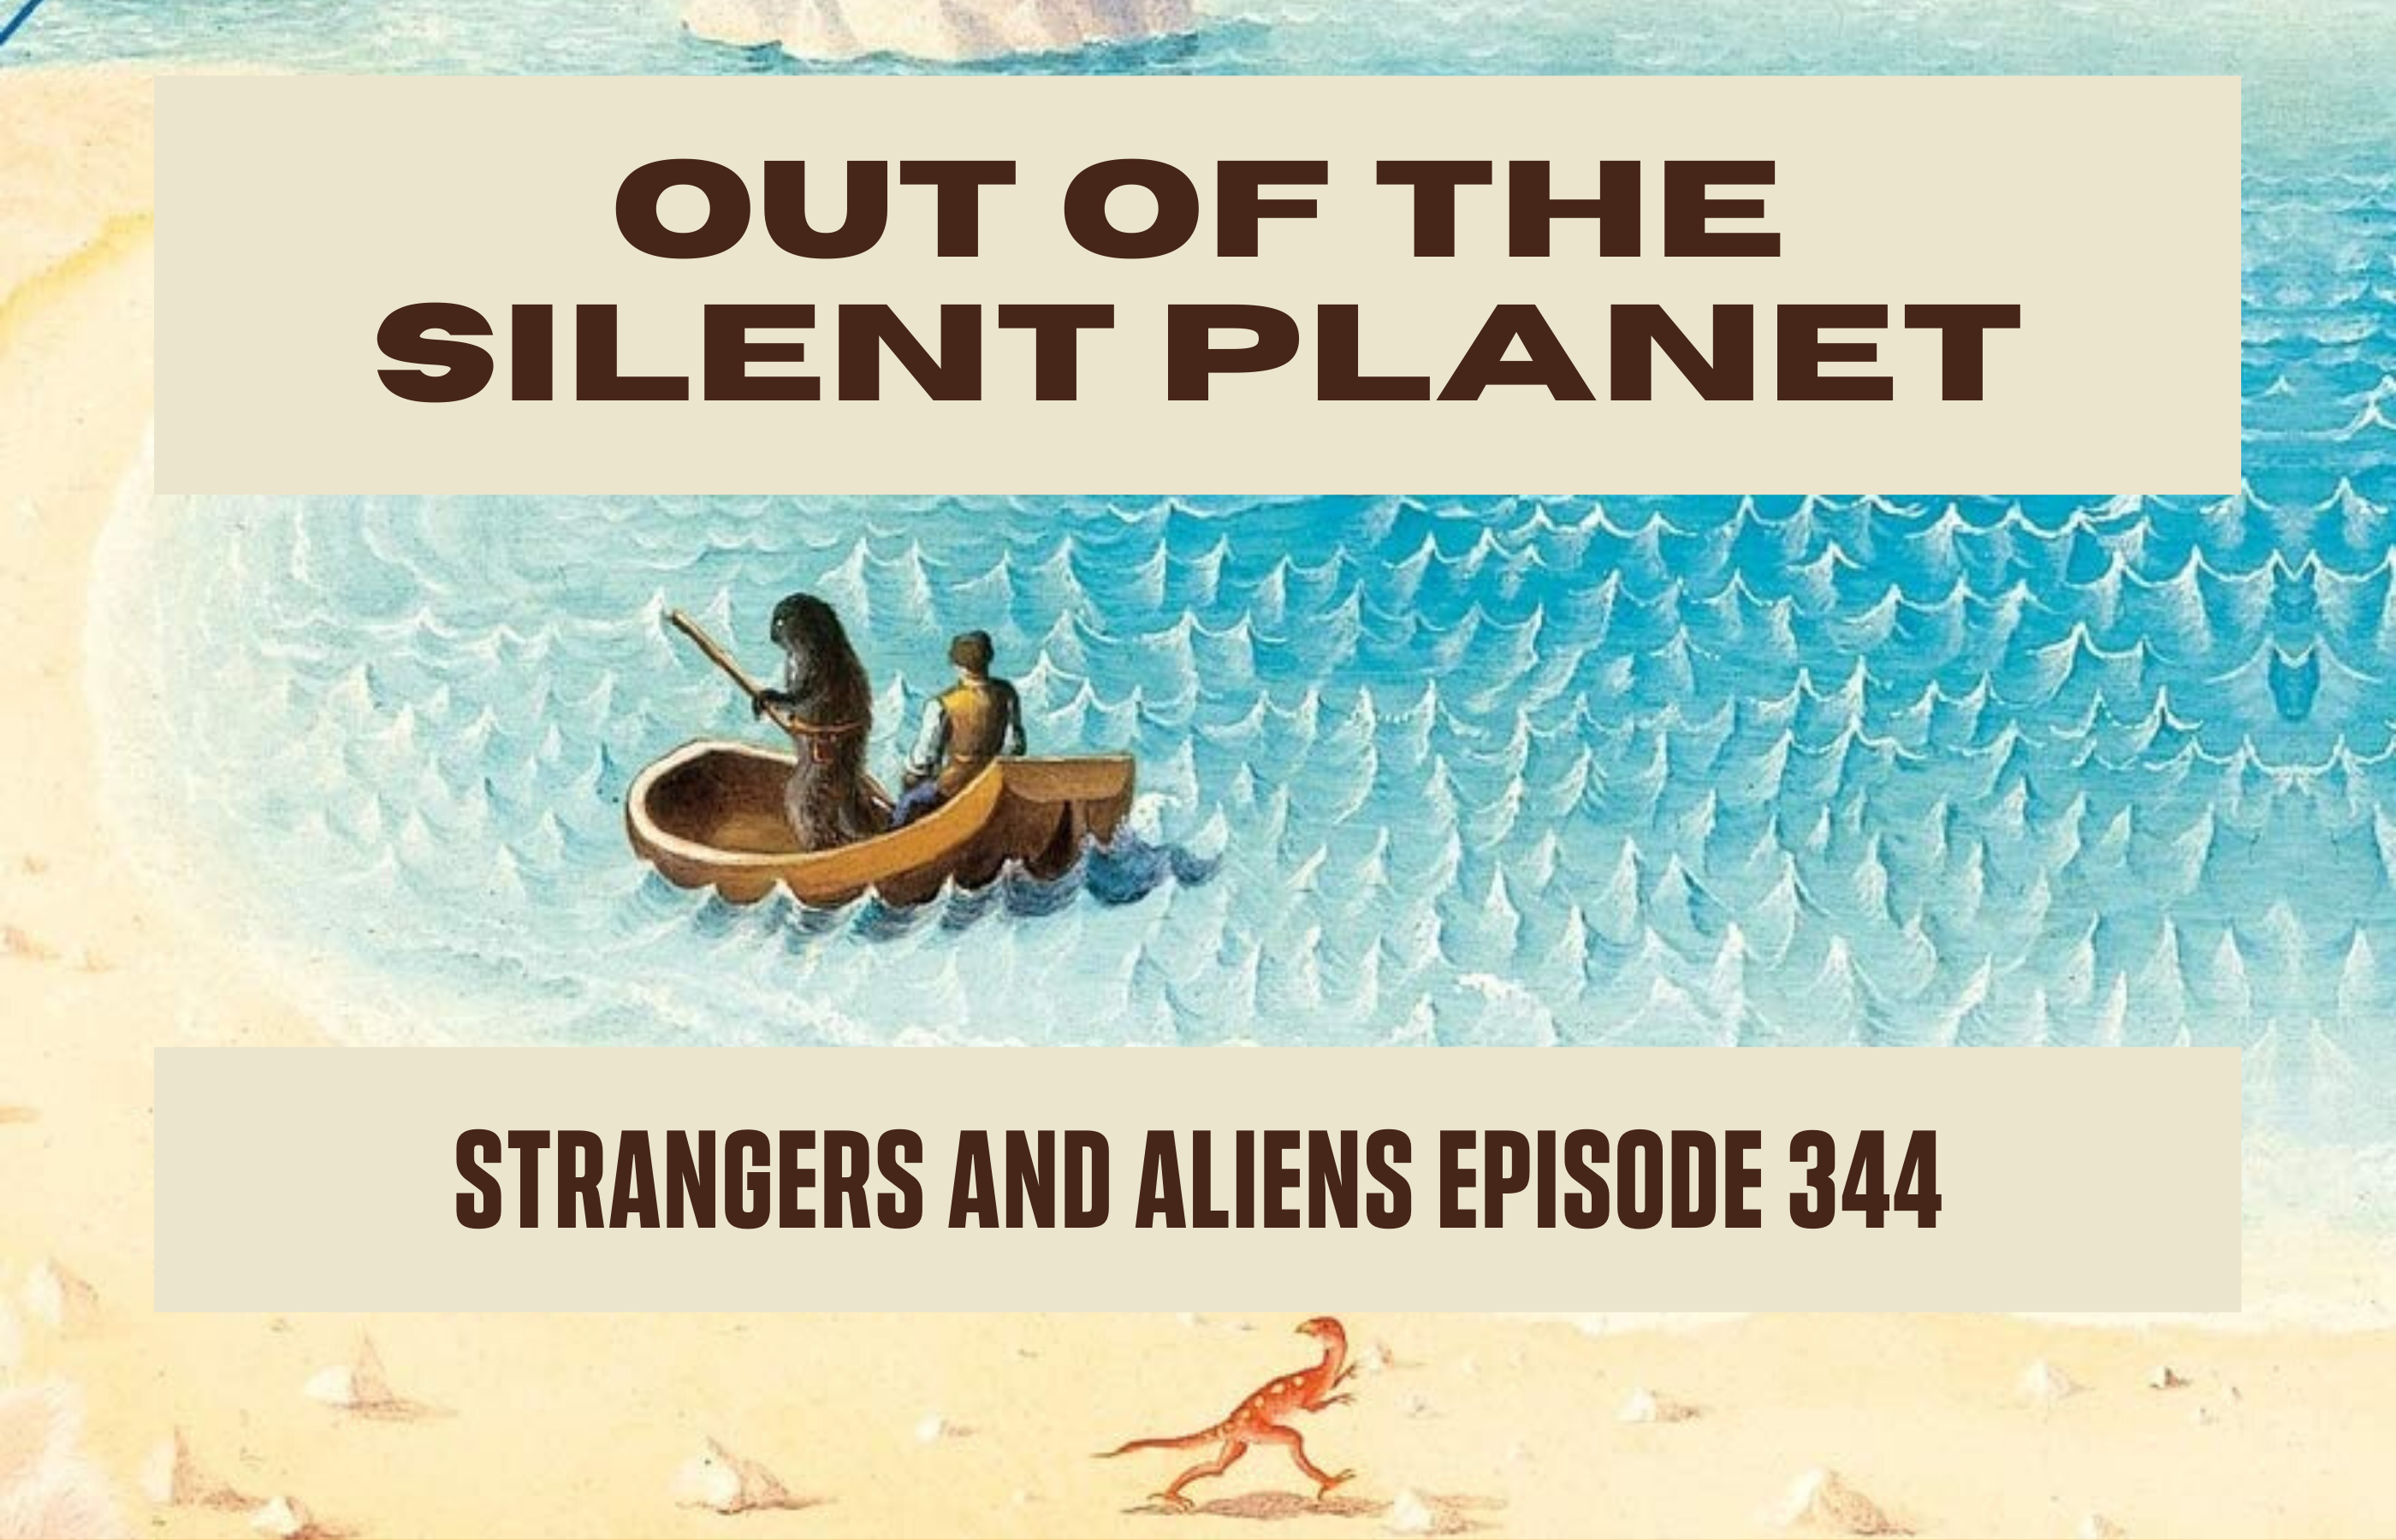 OUT OF THE SILENT PLANET (C.S. Lewis’ Space Trilogy Part 1) – SA344